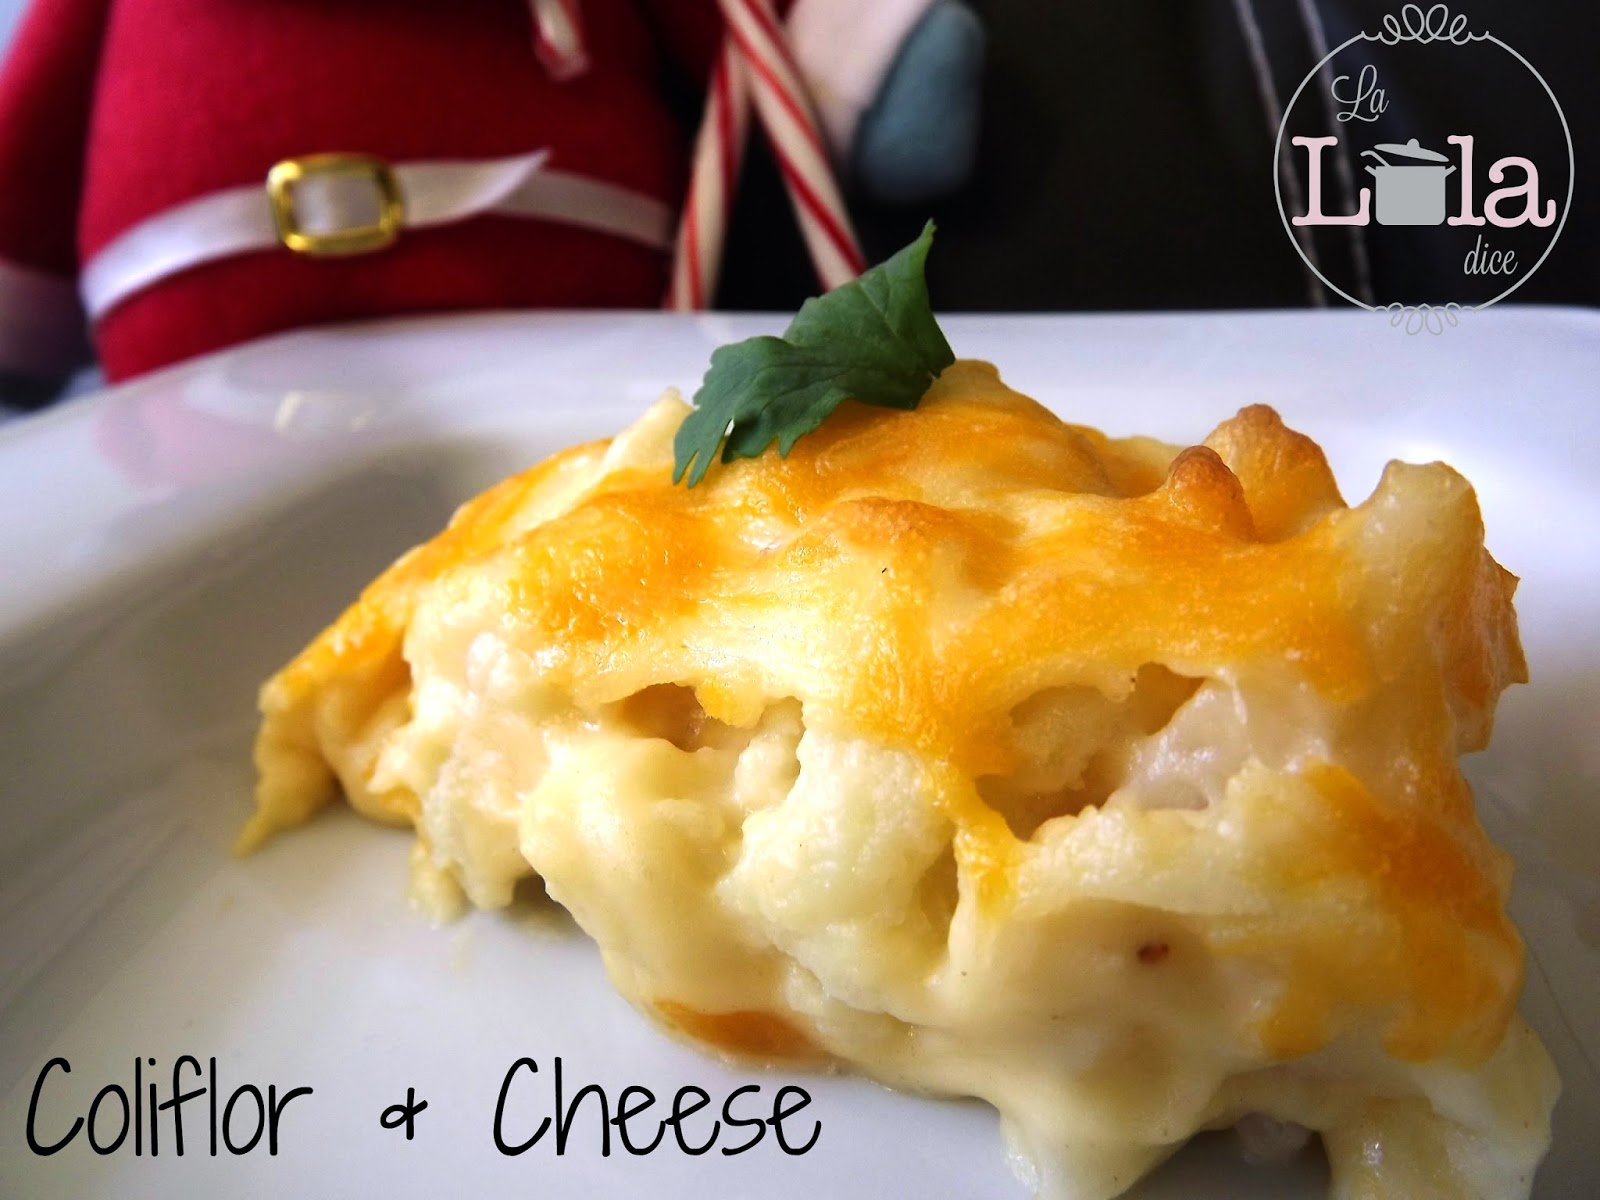 Coliflor & Cheese
